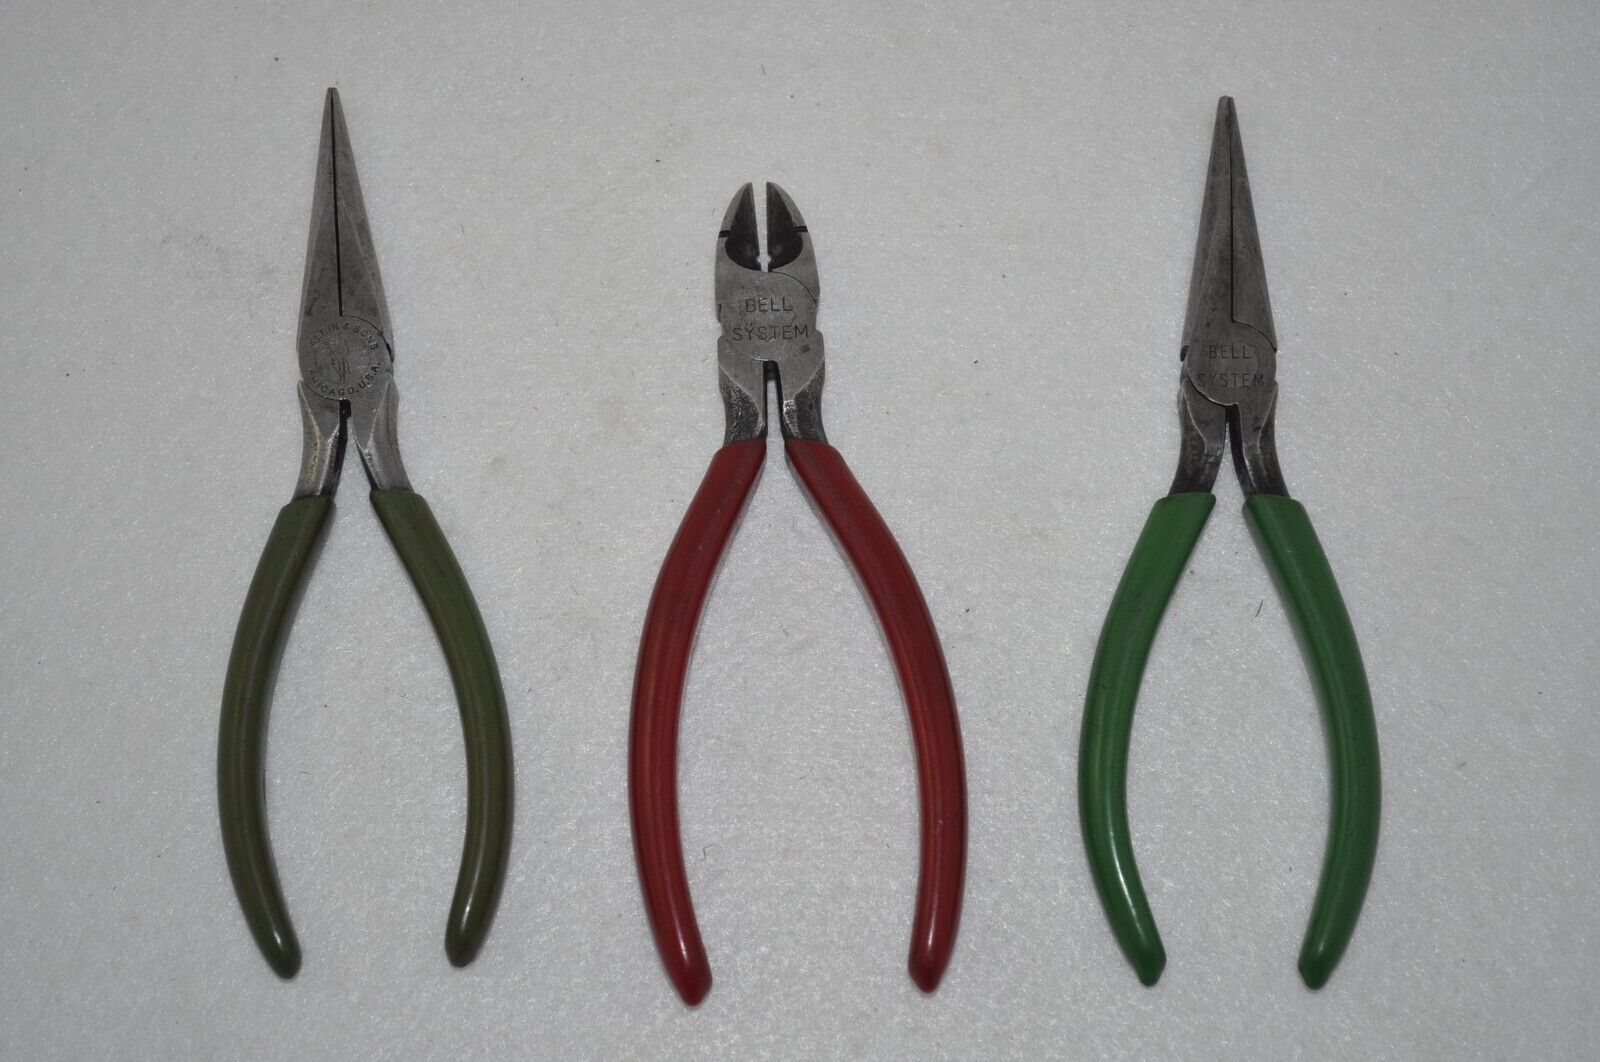 3 Vintage Klein Tool BELL SYSTEM Telephone Precision Pliers Wire Cutters